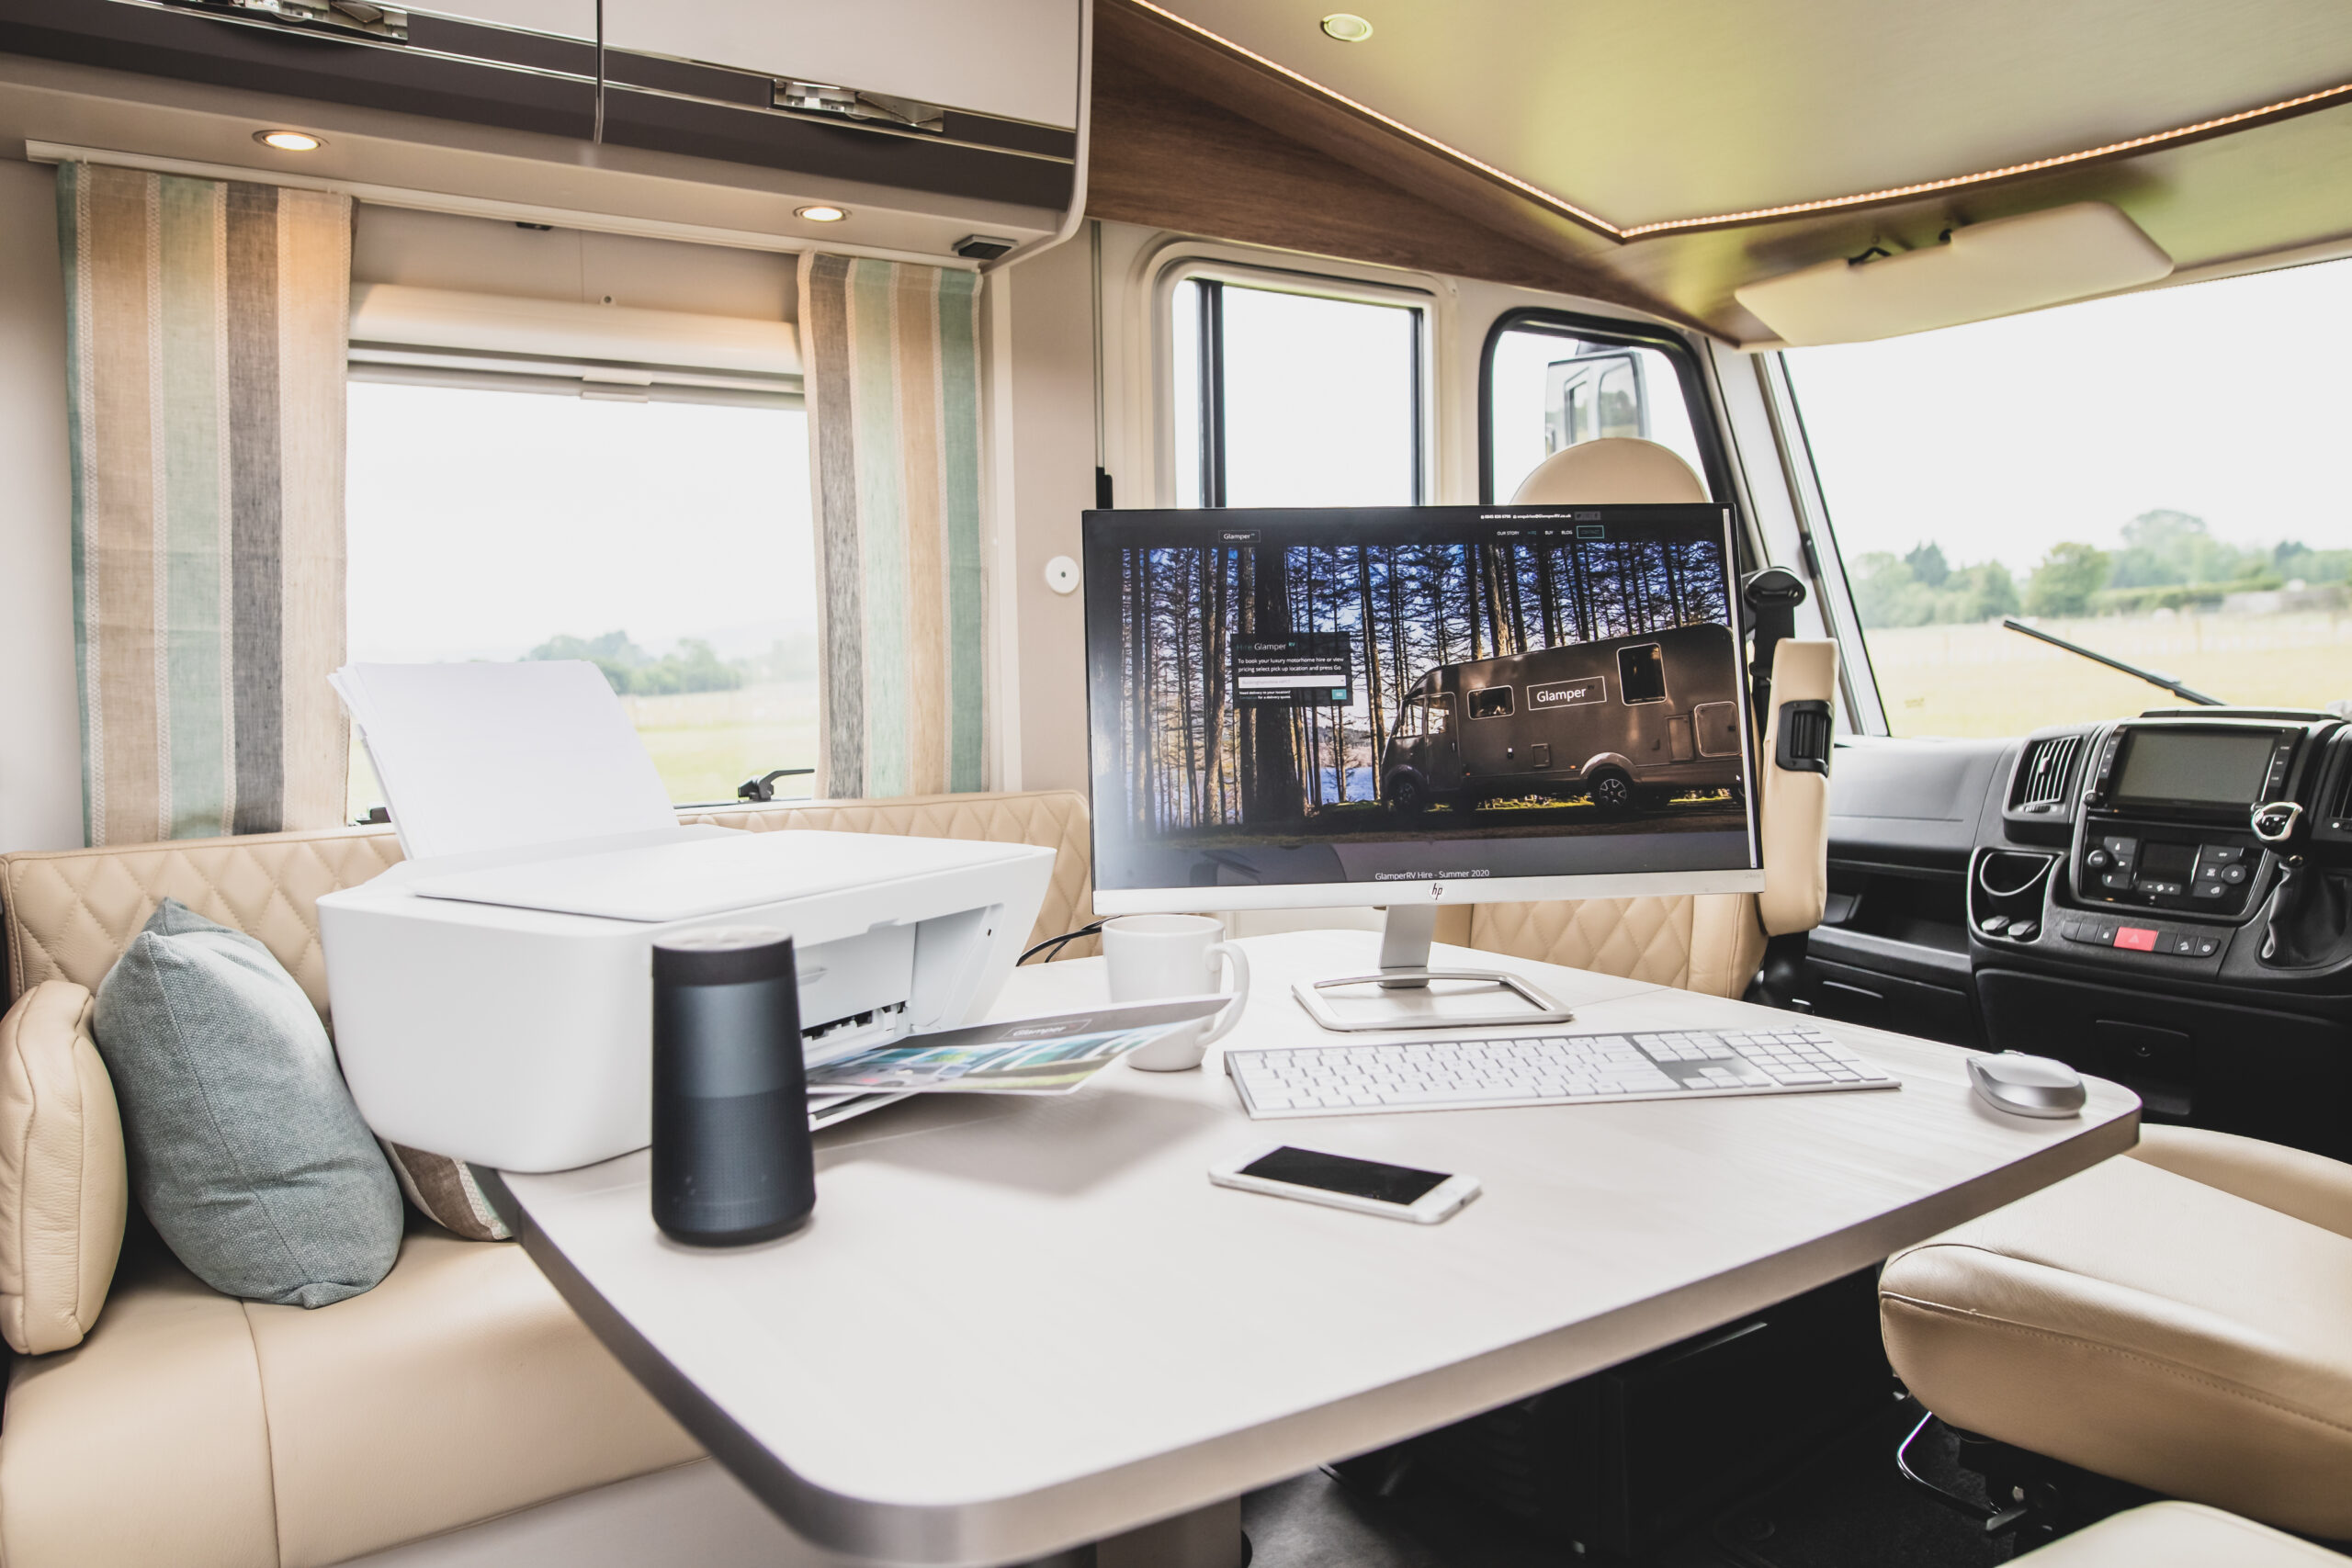 Van life: GlamperRV is a luxury mobile office for working from anywhere